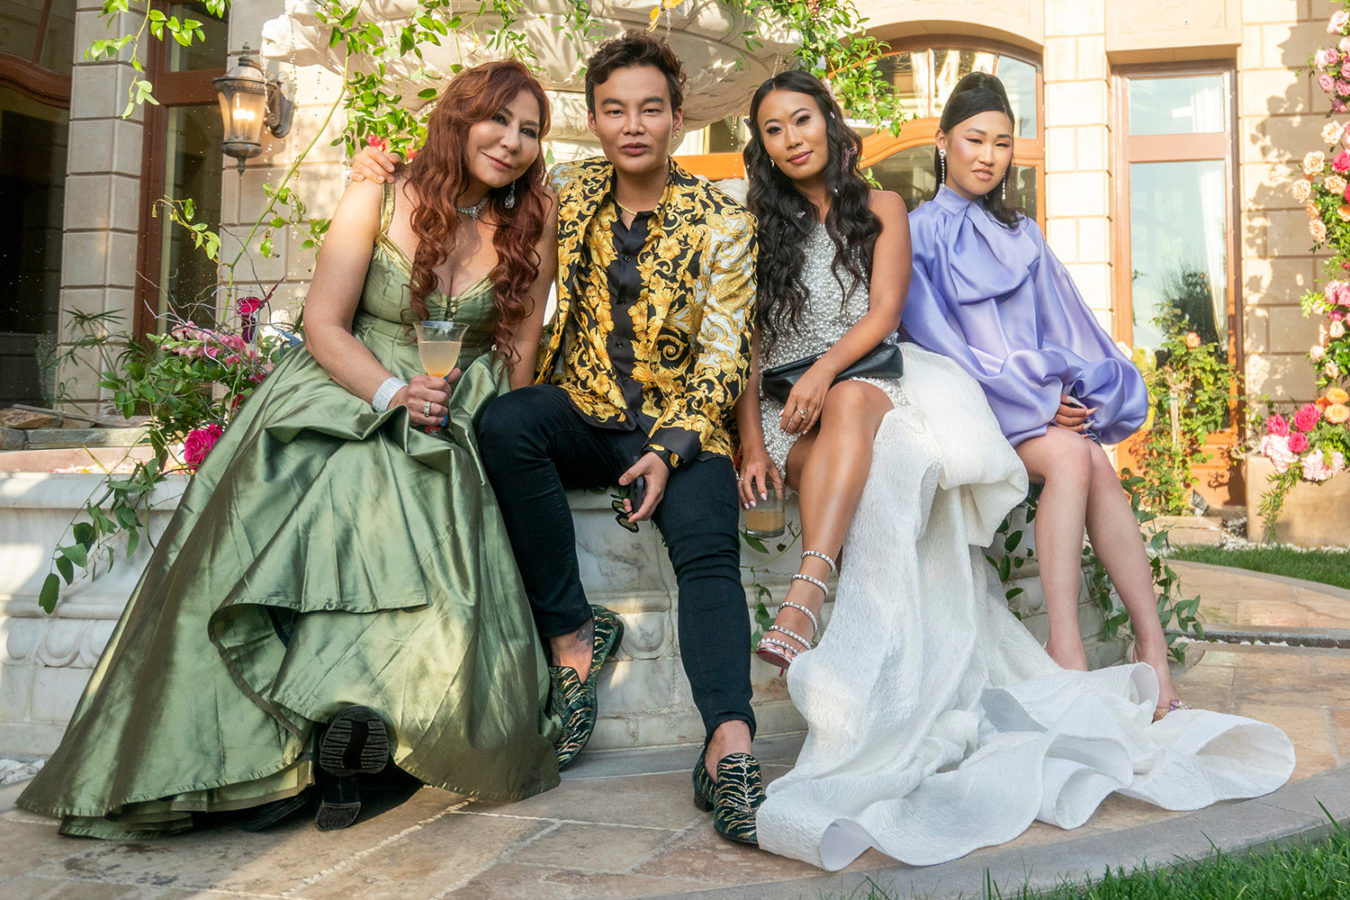 Old and New, Meet the Cast Members of ‘Bling Empire’ Season 2